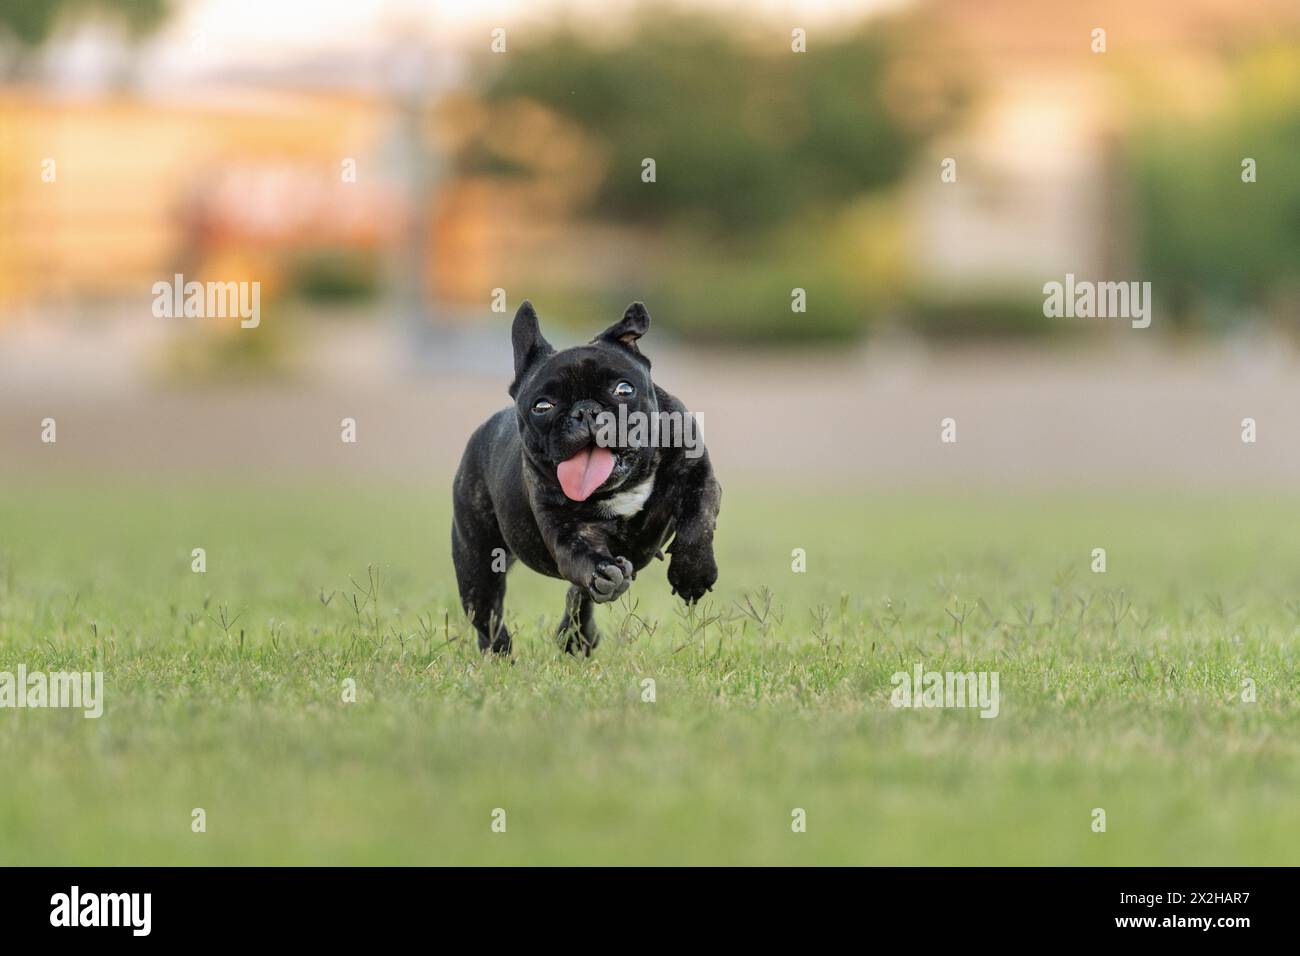 Small dark French bulldog smiling and running at the park in the grass Stock Photo